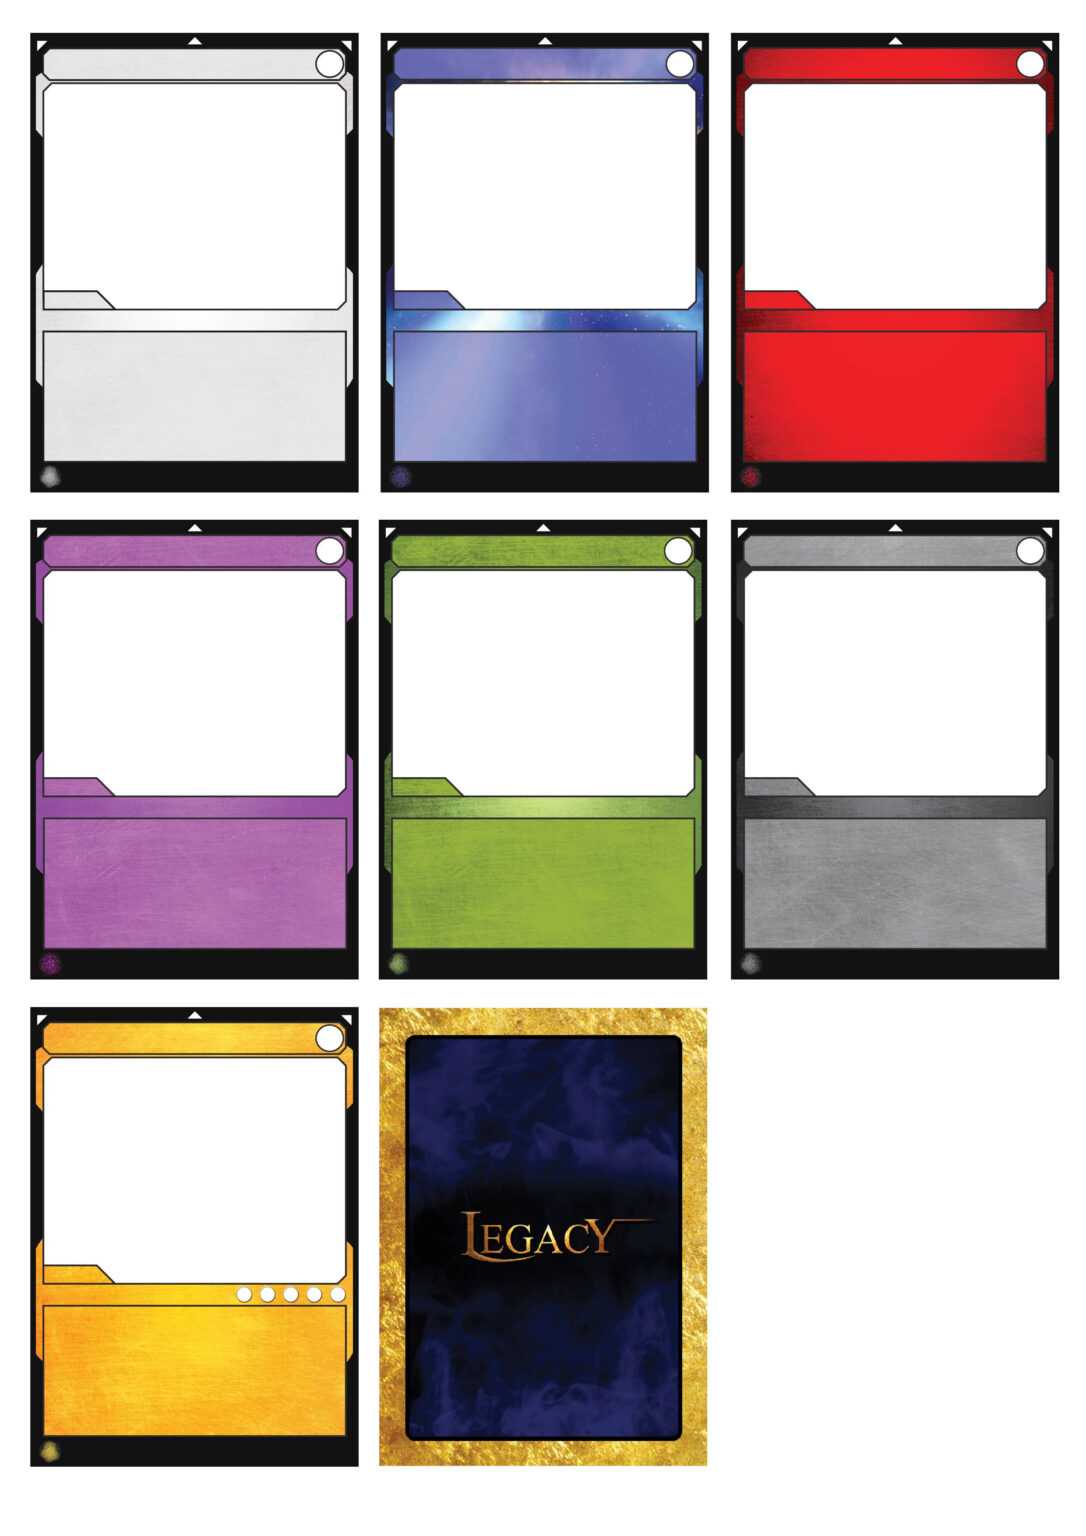 025 Template Ideas Board Game Cards 314204 Free Trading Card for